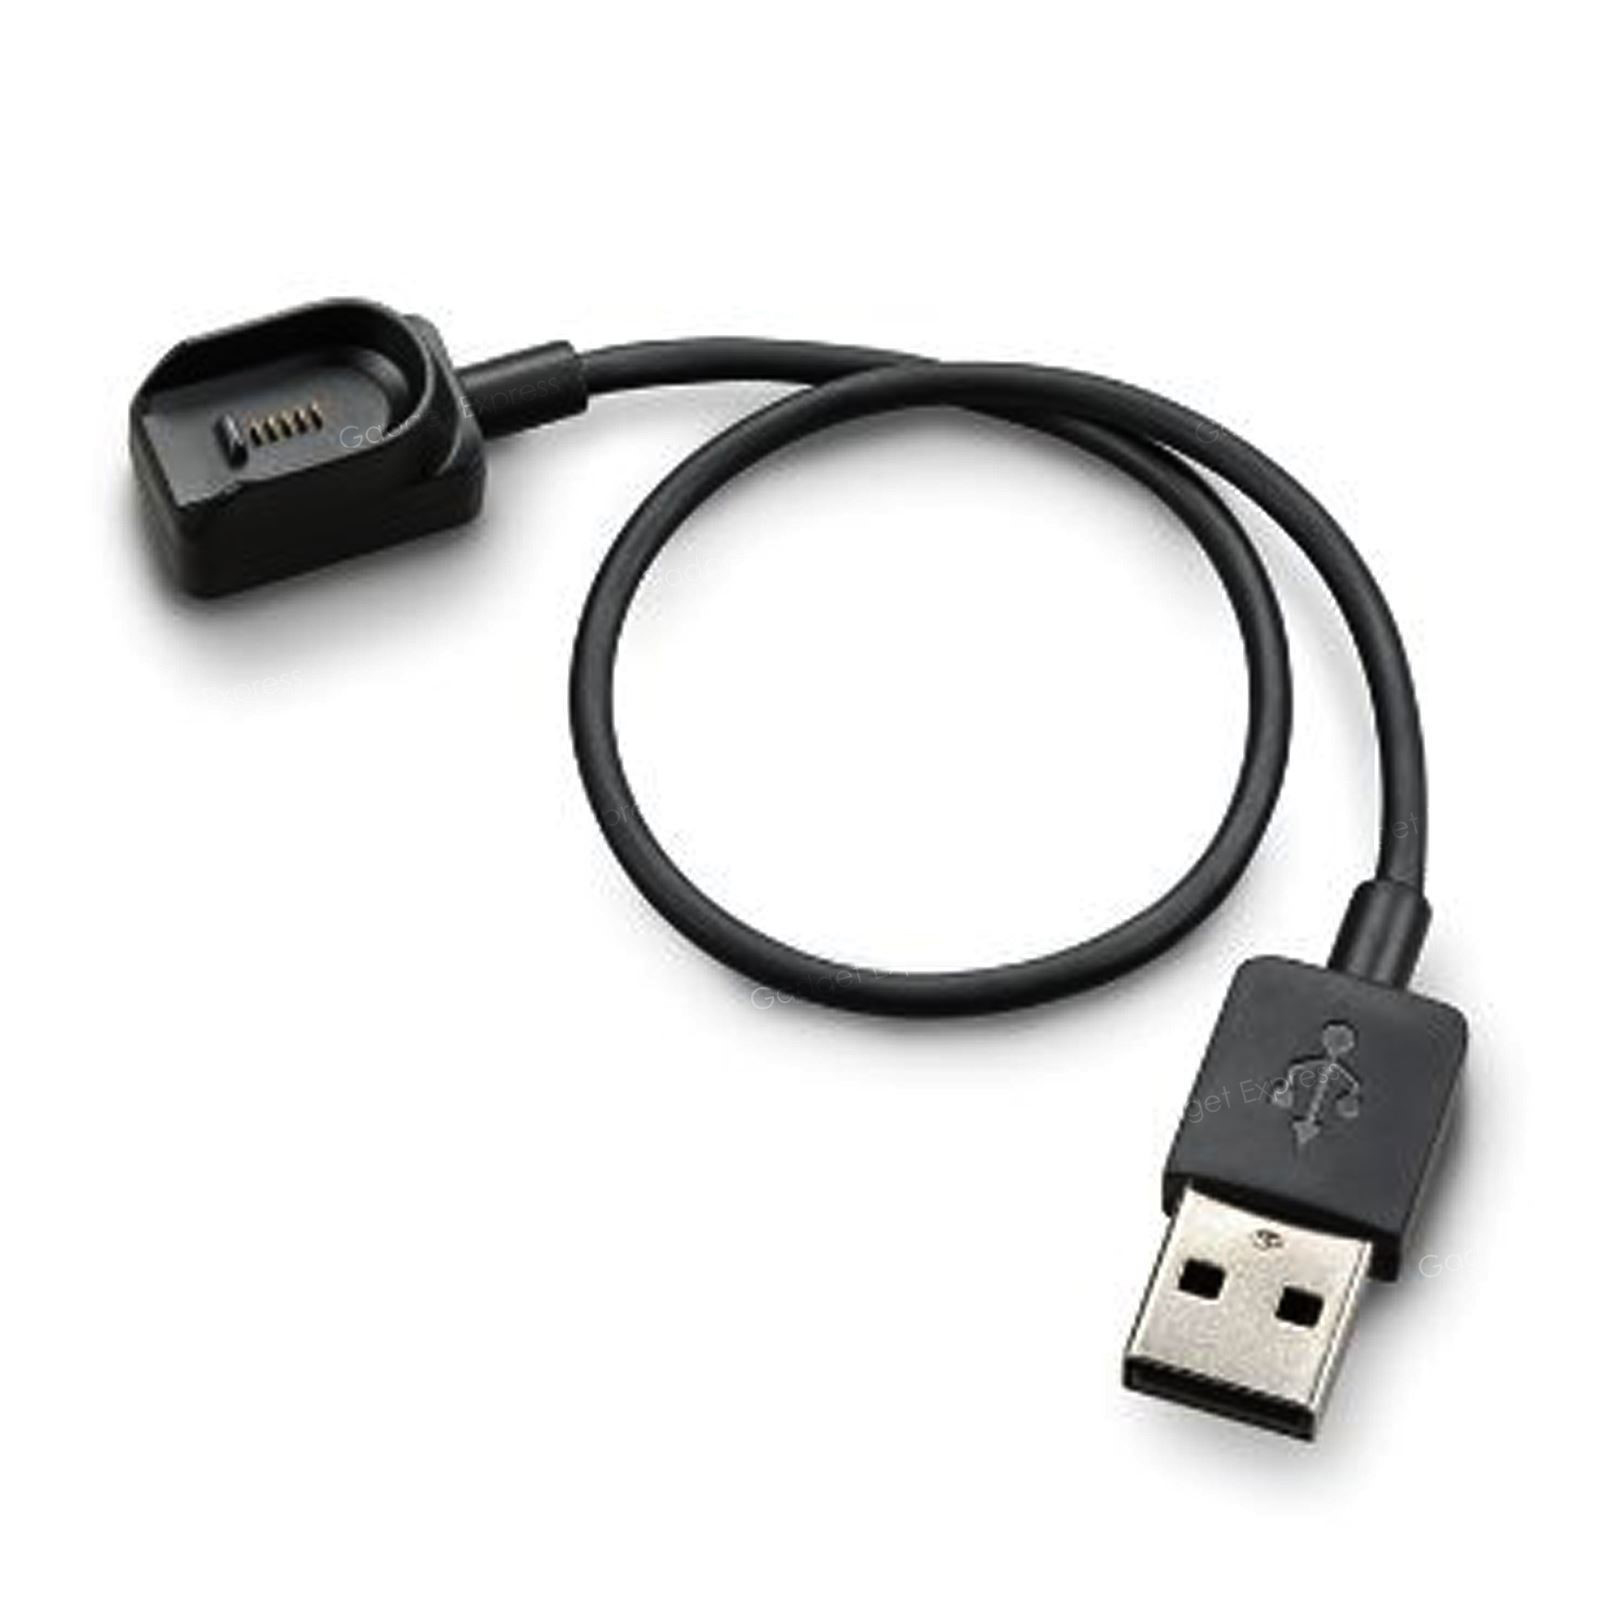 Planttronics spare,charging cable mobile